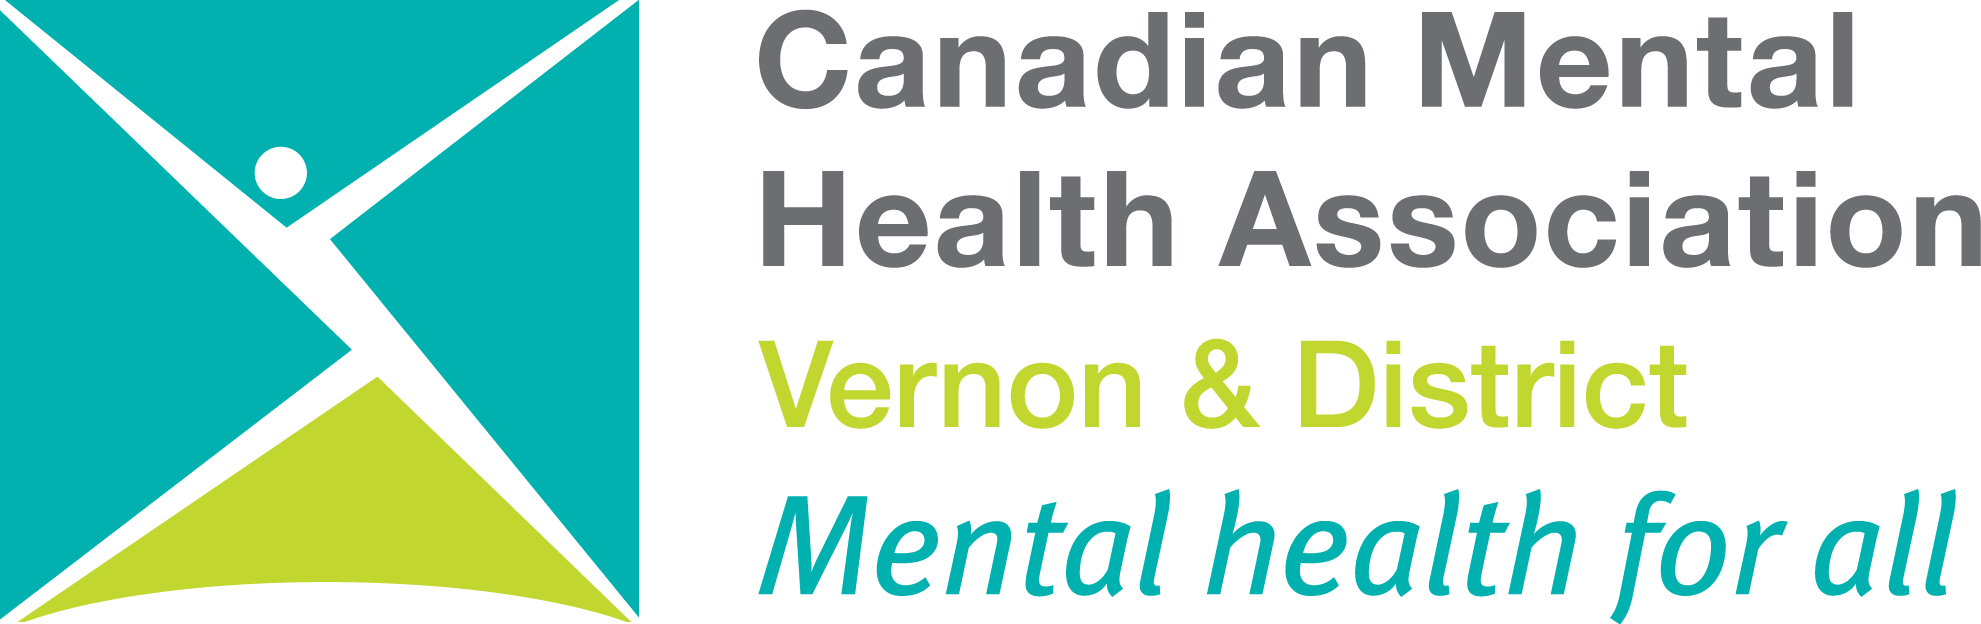 CANADIAN MENTAL HEALTH ASSOCIATION VERNON AND DISTRICT BRANCH logo